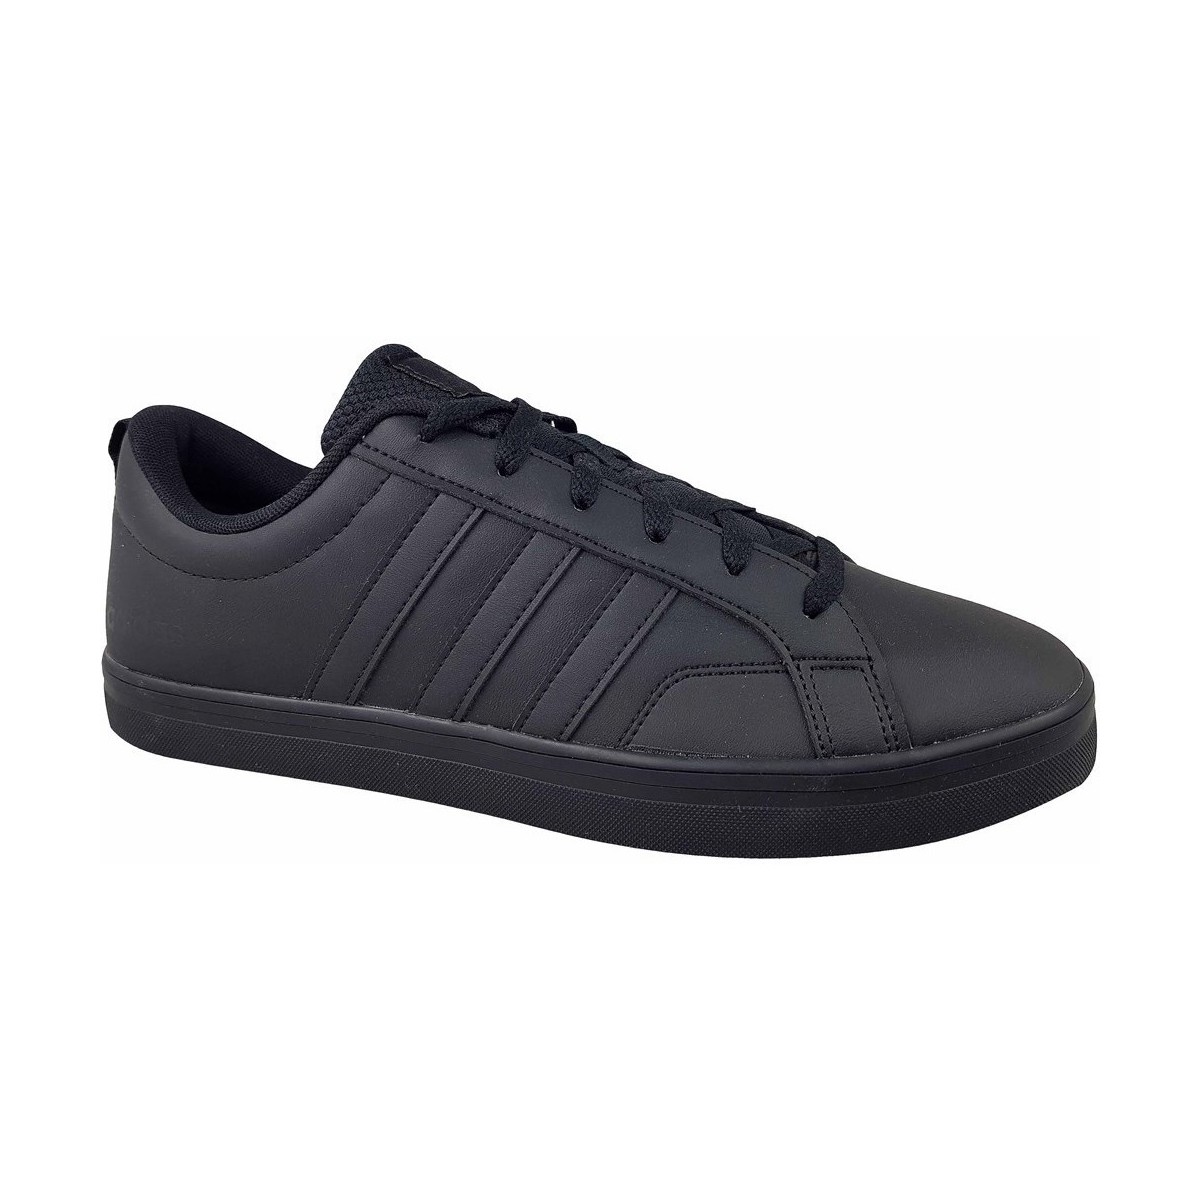 Adidas Vs Pace 20 Black - Trainerspotter